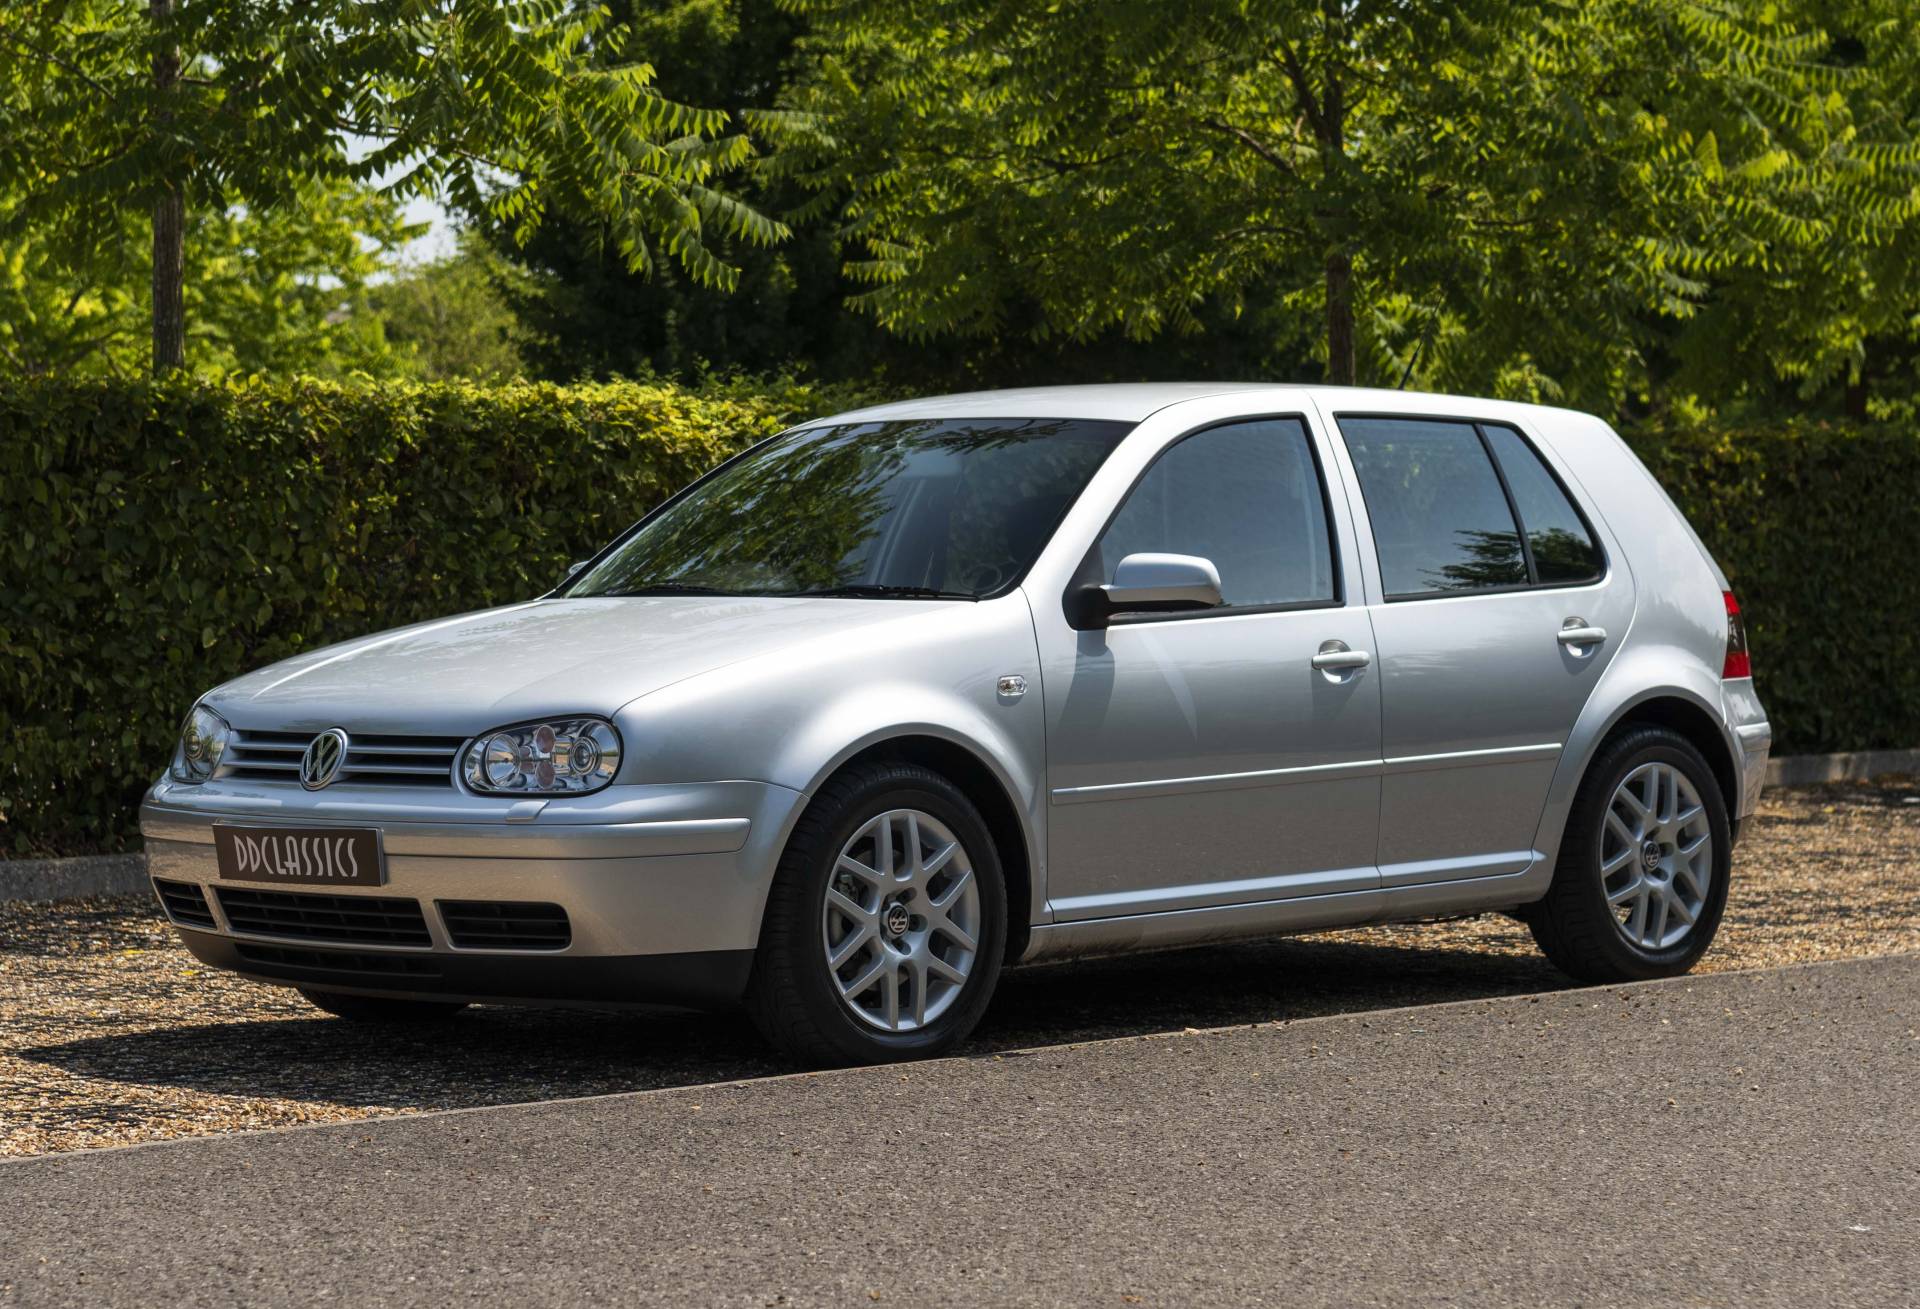 For Sale: Volkswagen Golf IV 1.8T GTI (2001) offered for Price on request